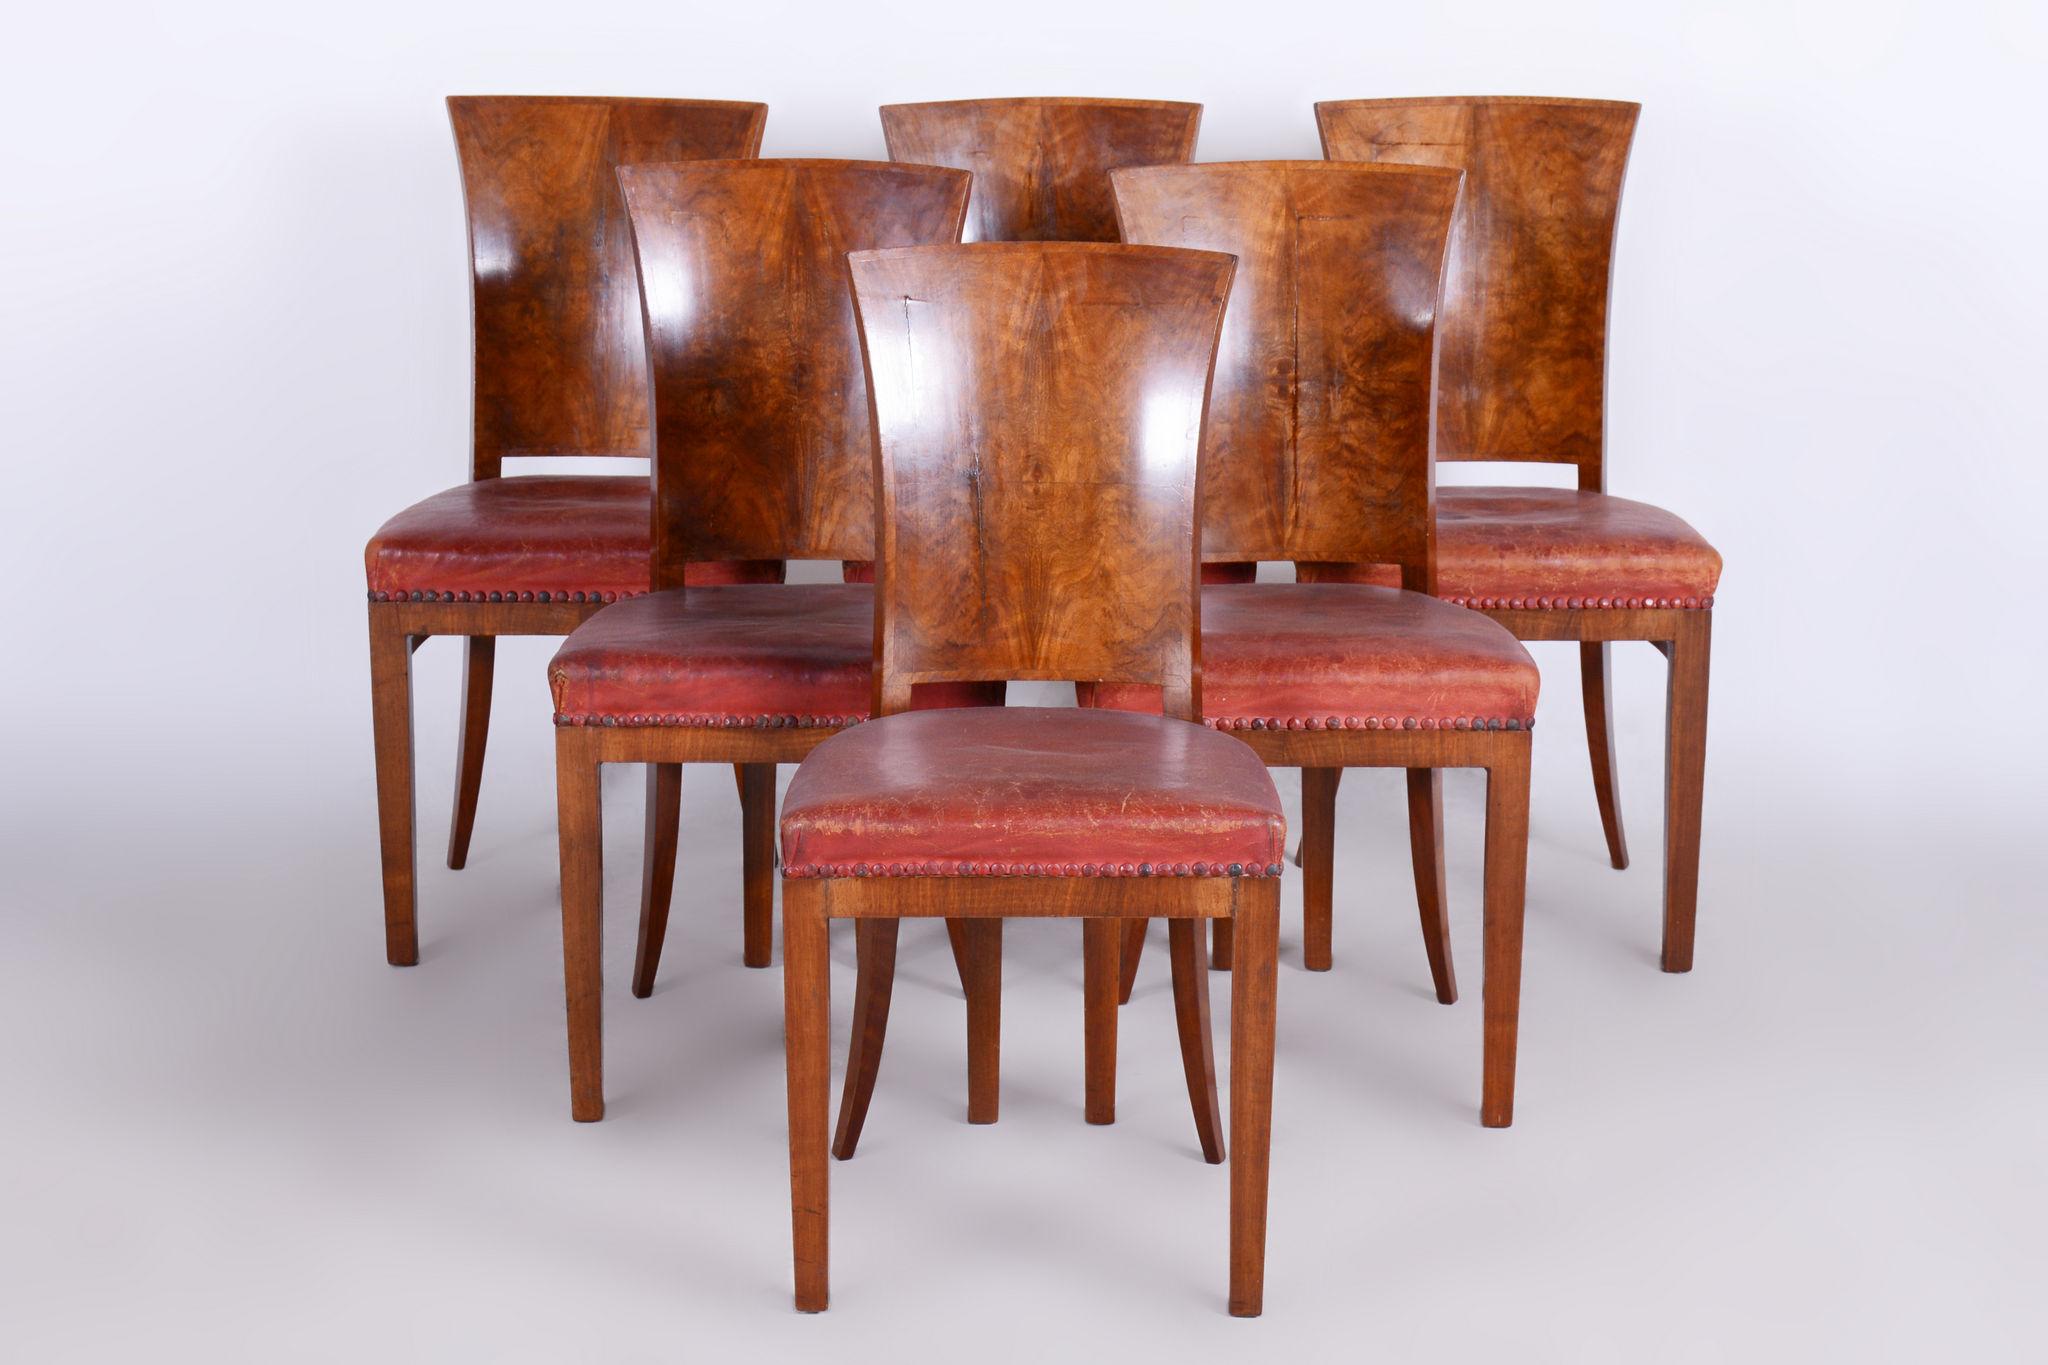 Six Art Deco chairs

Origin: France 
Period: 1920-1929
Material: Walnut, red leather, original upholstery

In pristine original condition, the upholstery has been professionally cleaned, and its polish revived by our refurbishing team in Czechia.